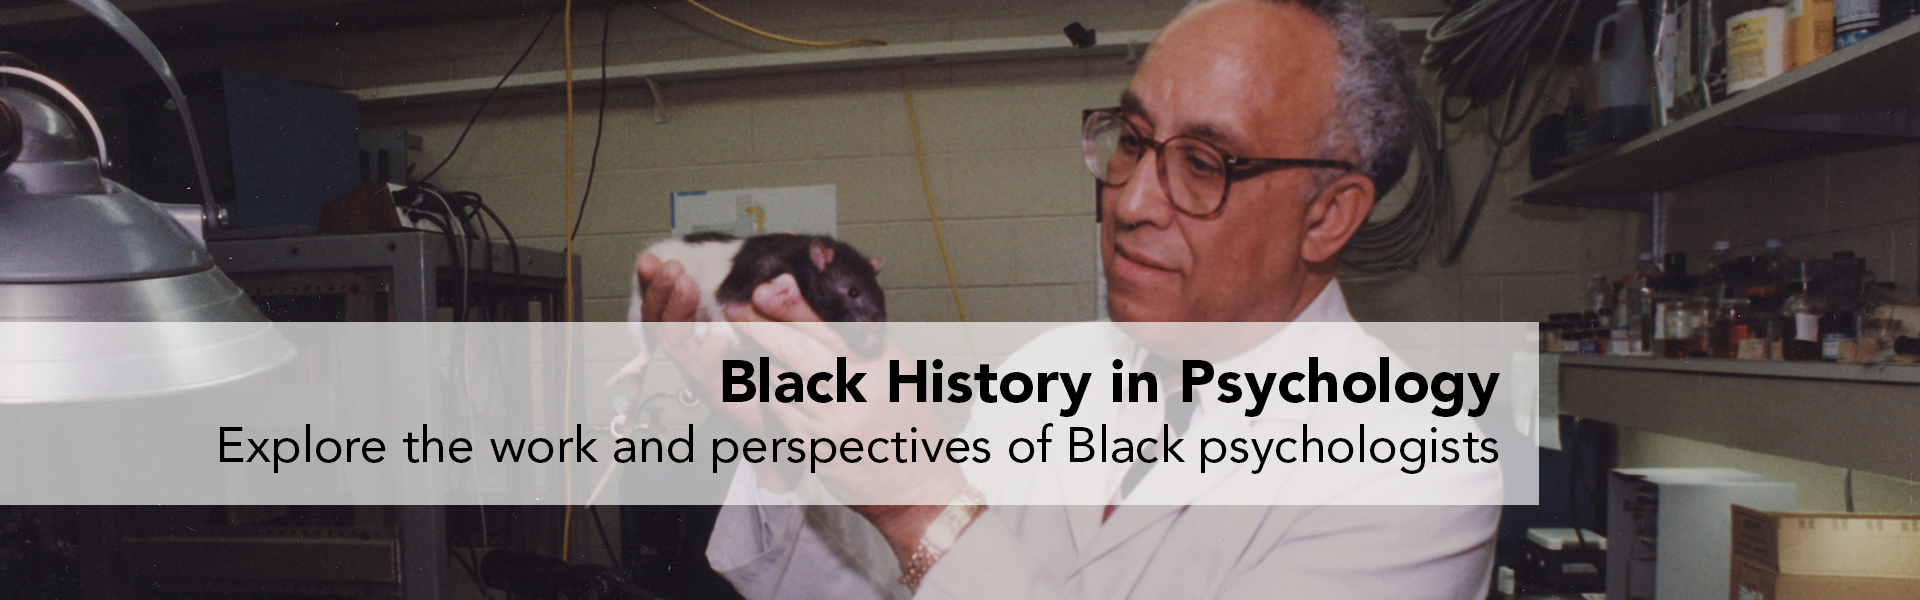 Black History in Psychology. Explore the work and perspectives of Black psychologists.